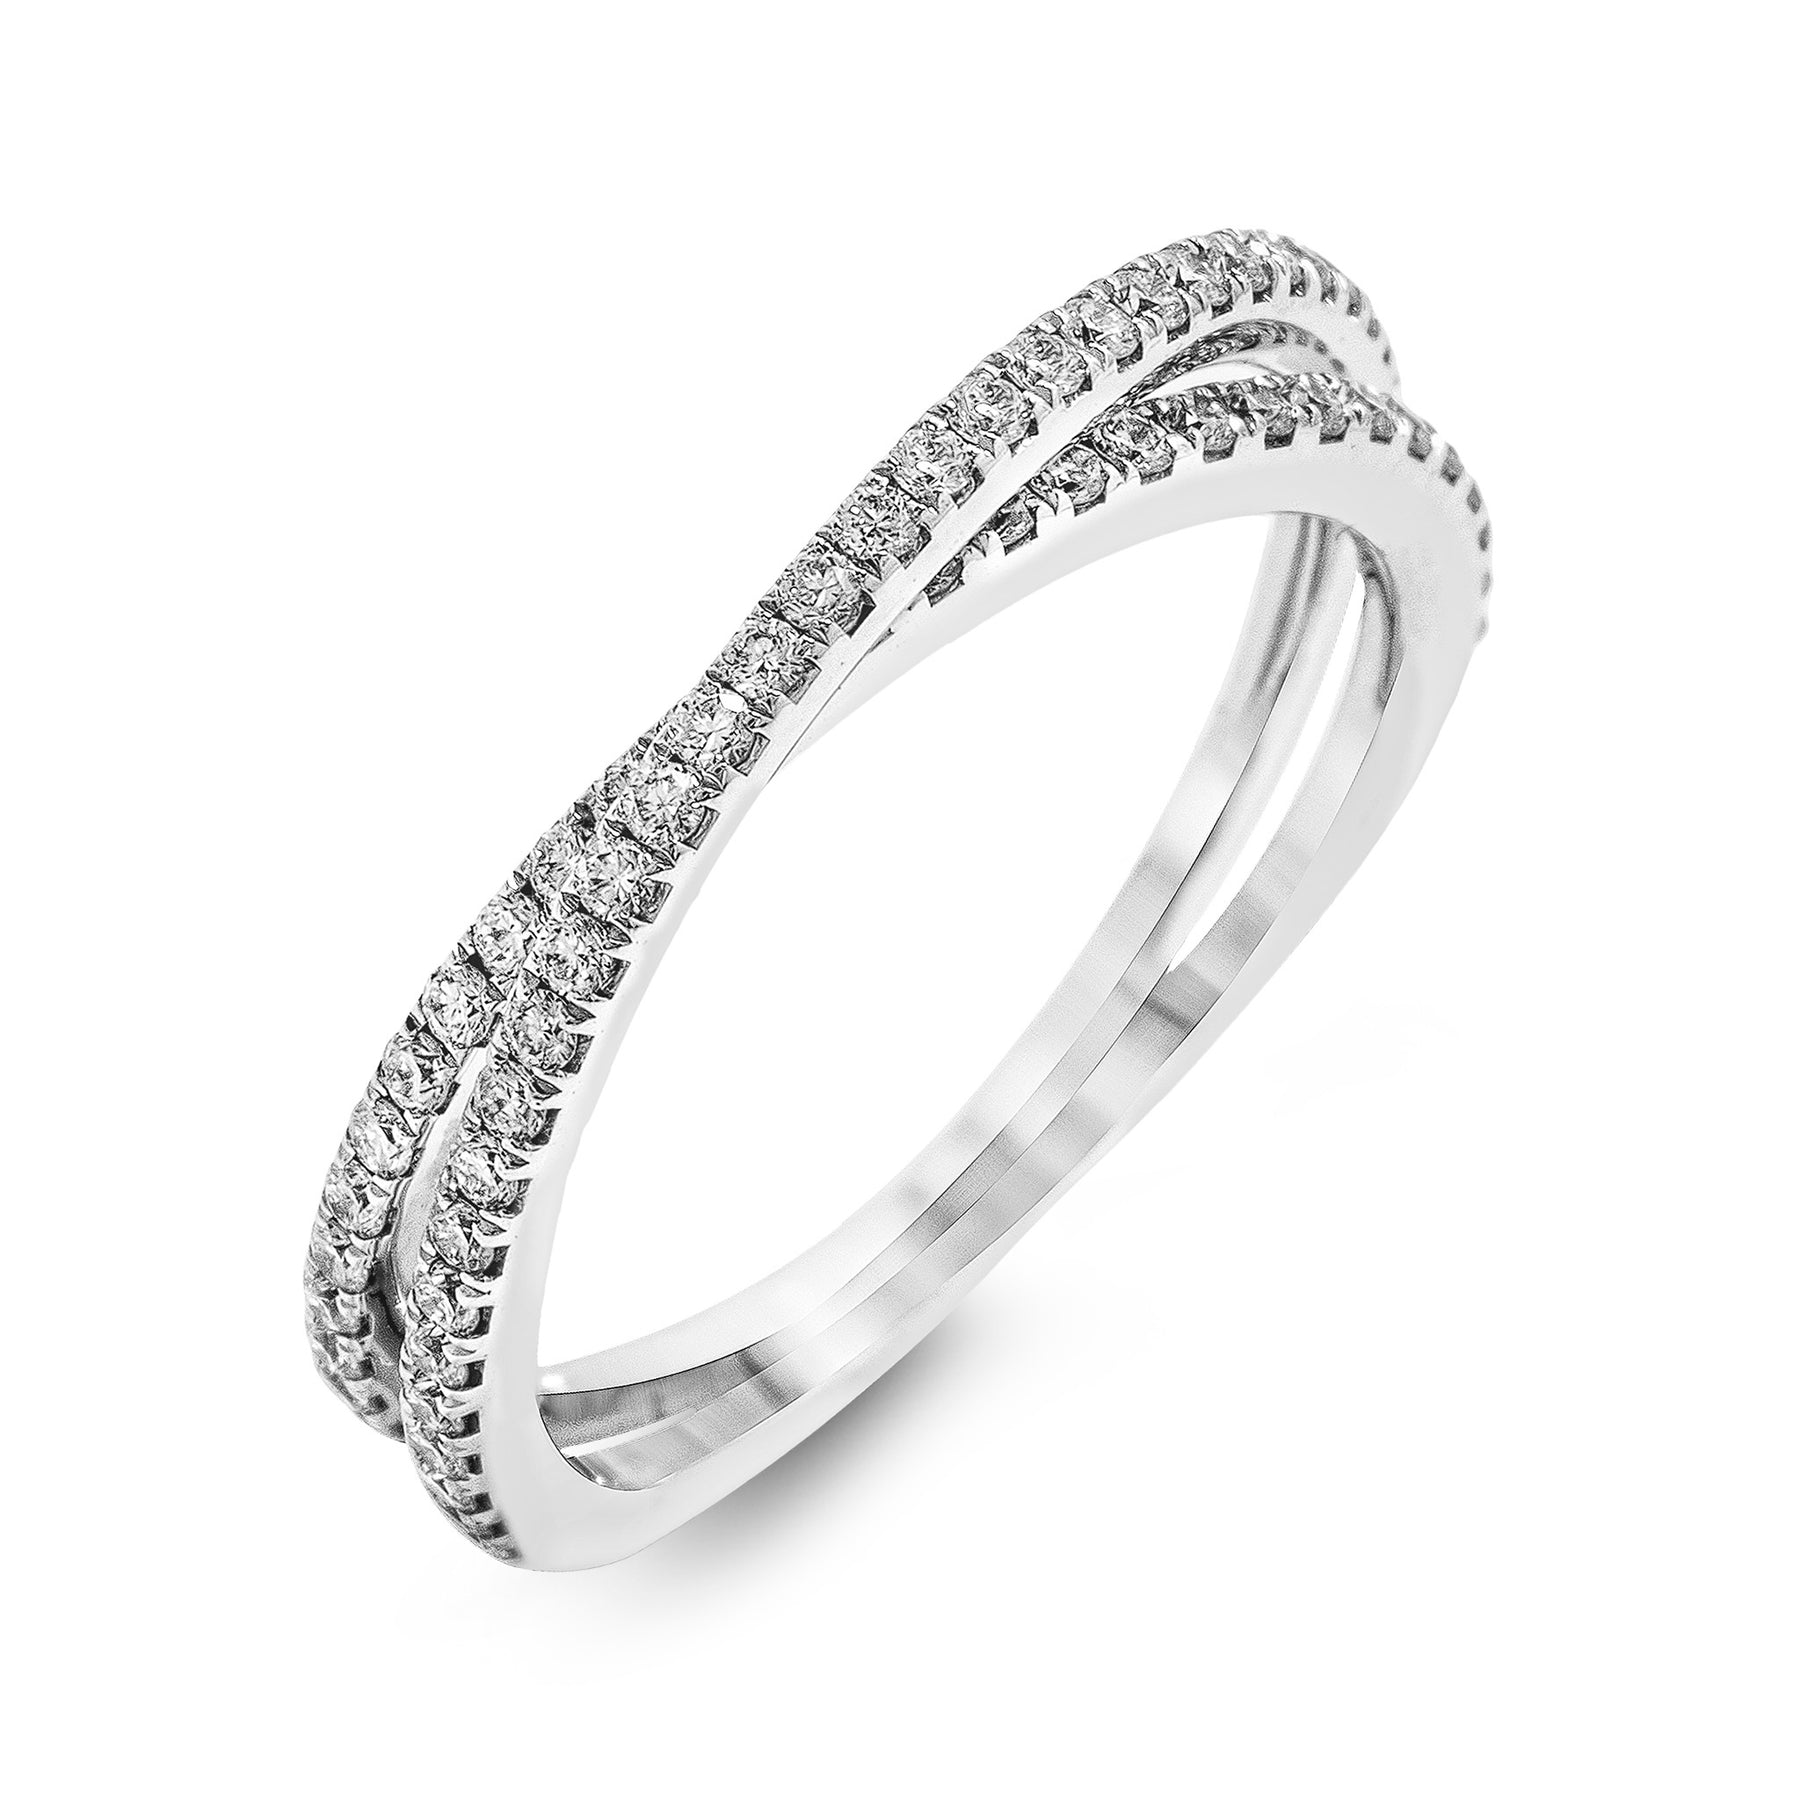 Criss-cross Wedding Band in 18k Gold with Diamonds MR1577-A-B